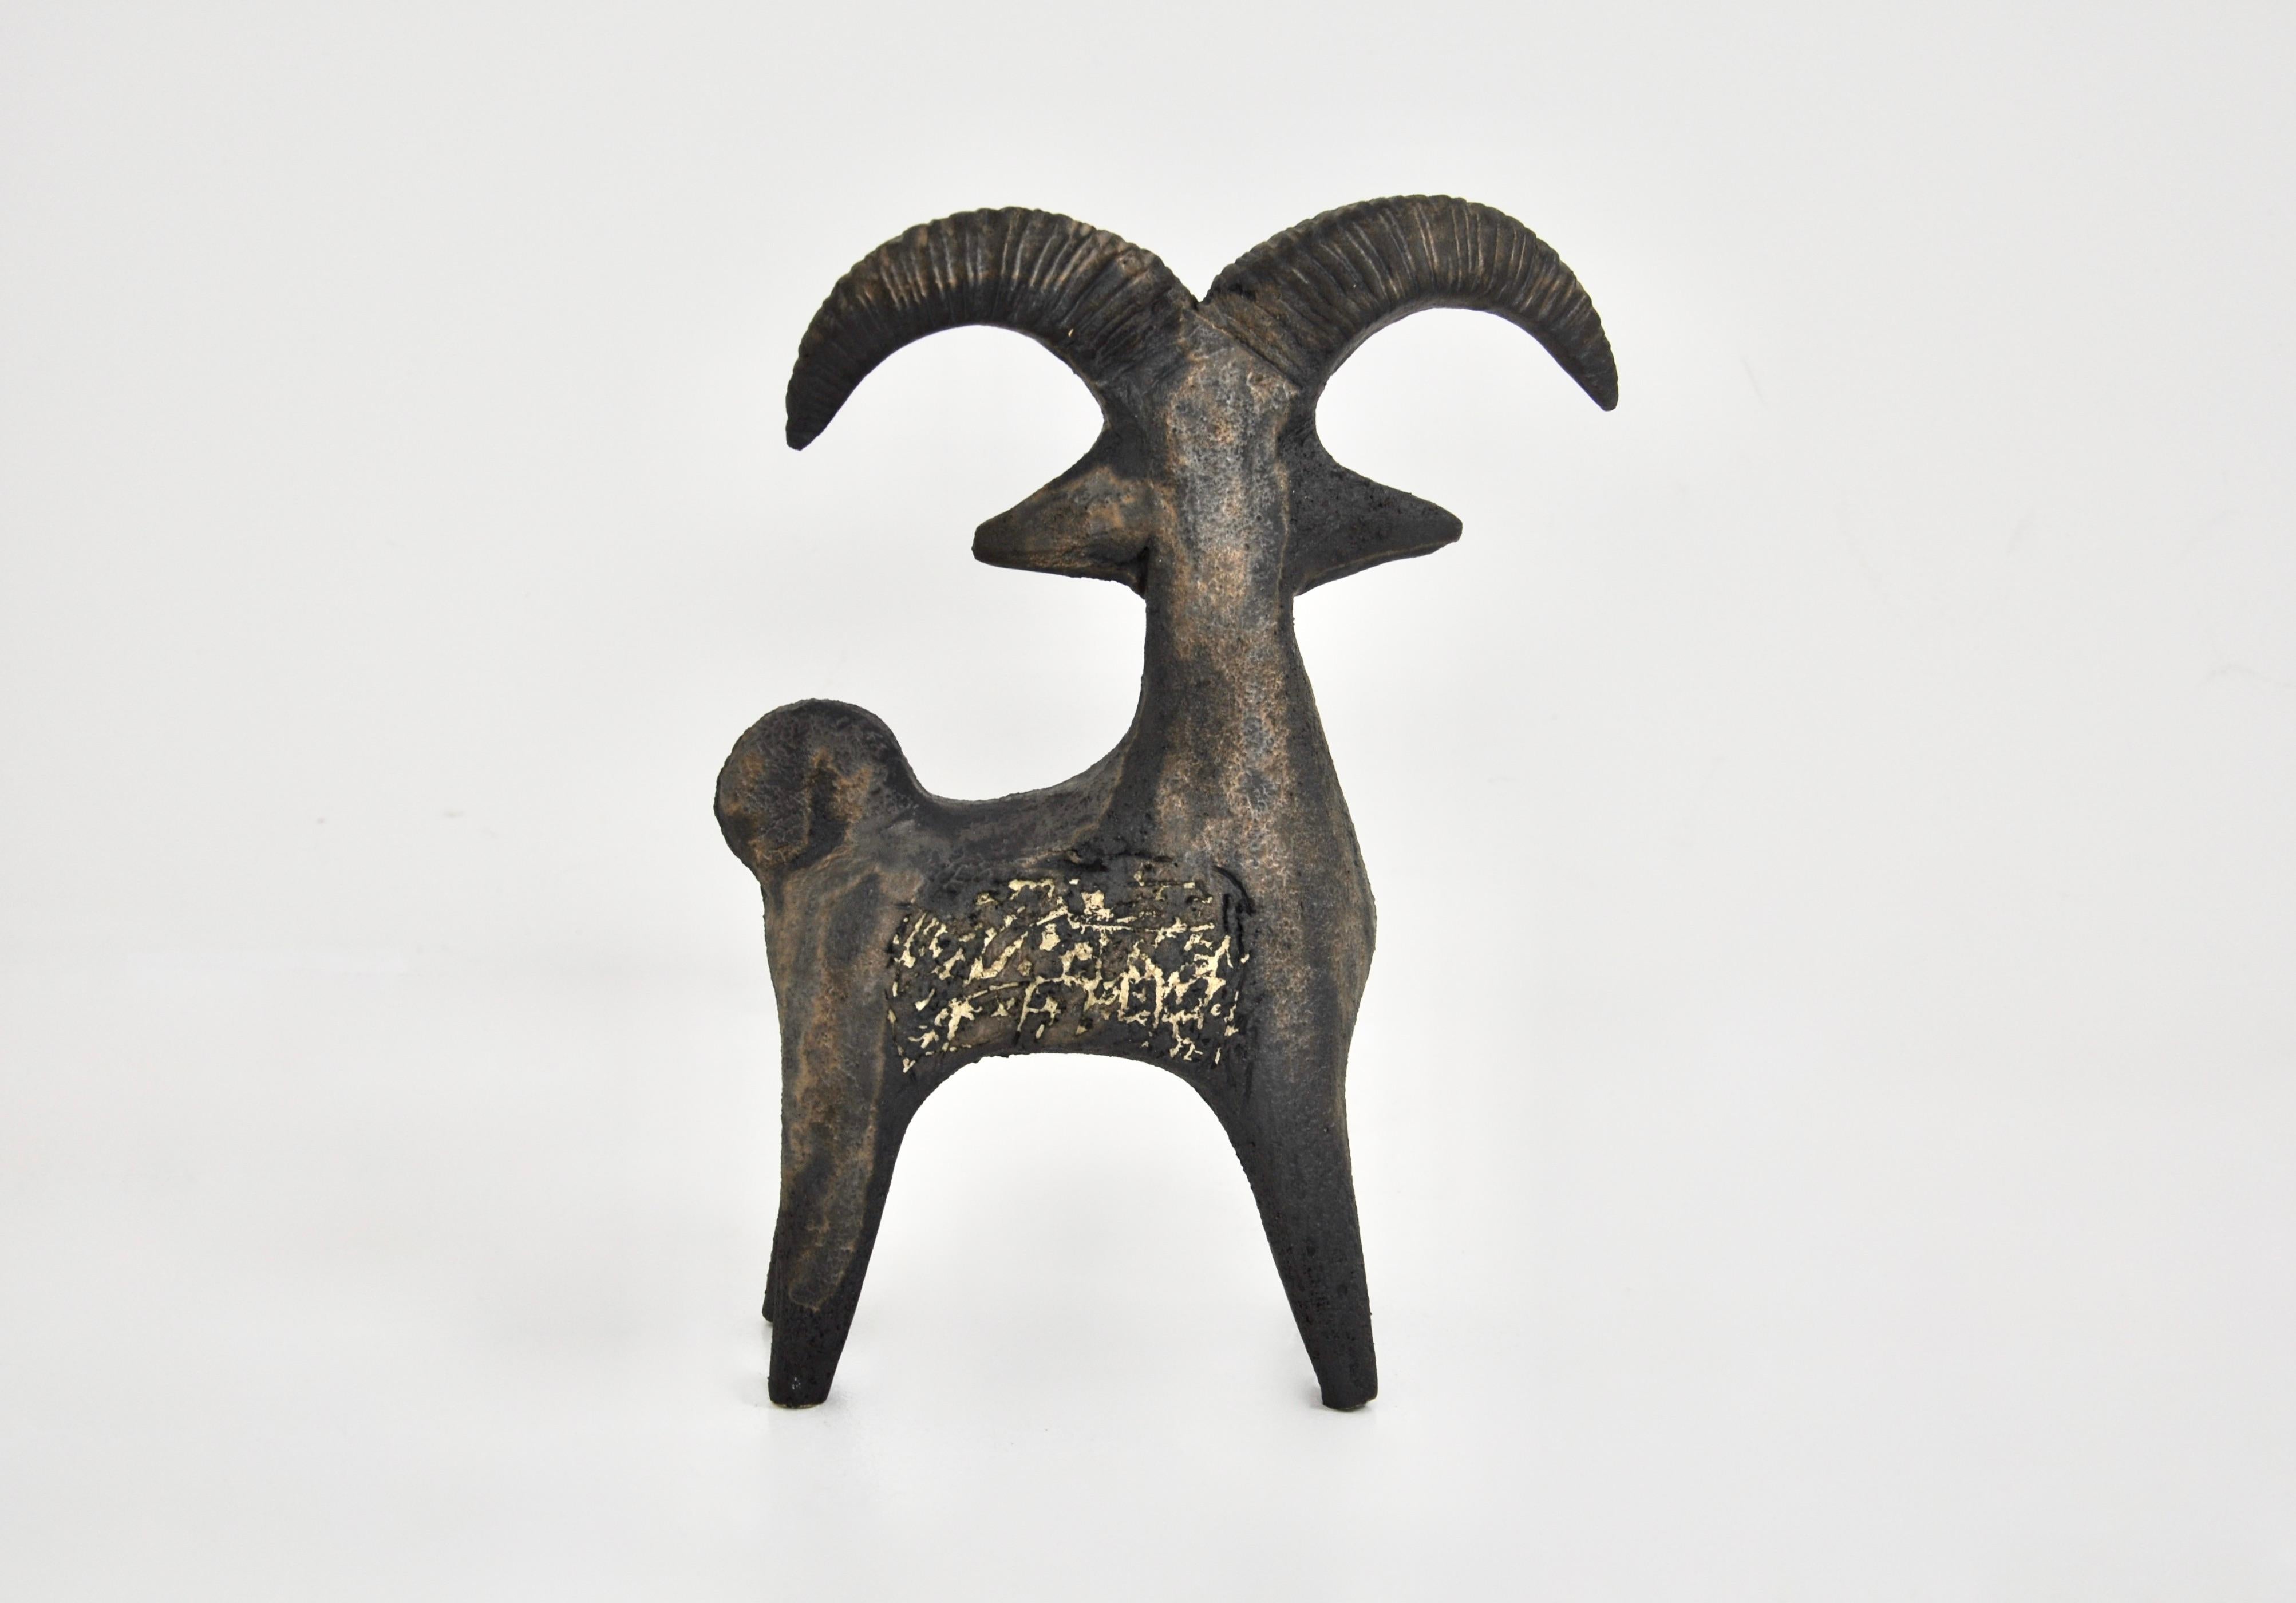 French Goat Ceramic by Dominique Pouchain